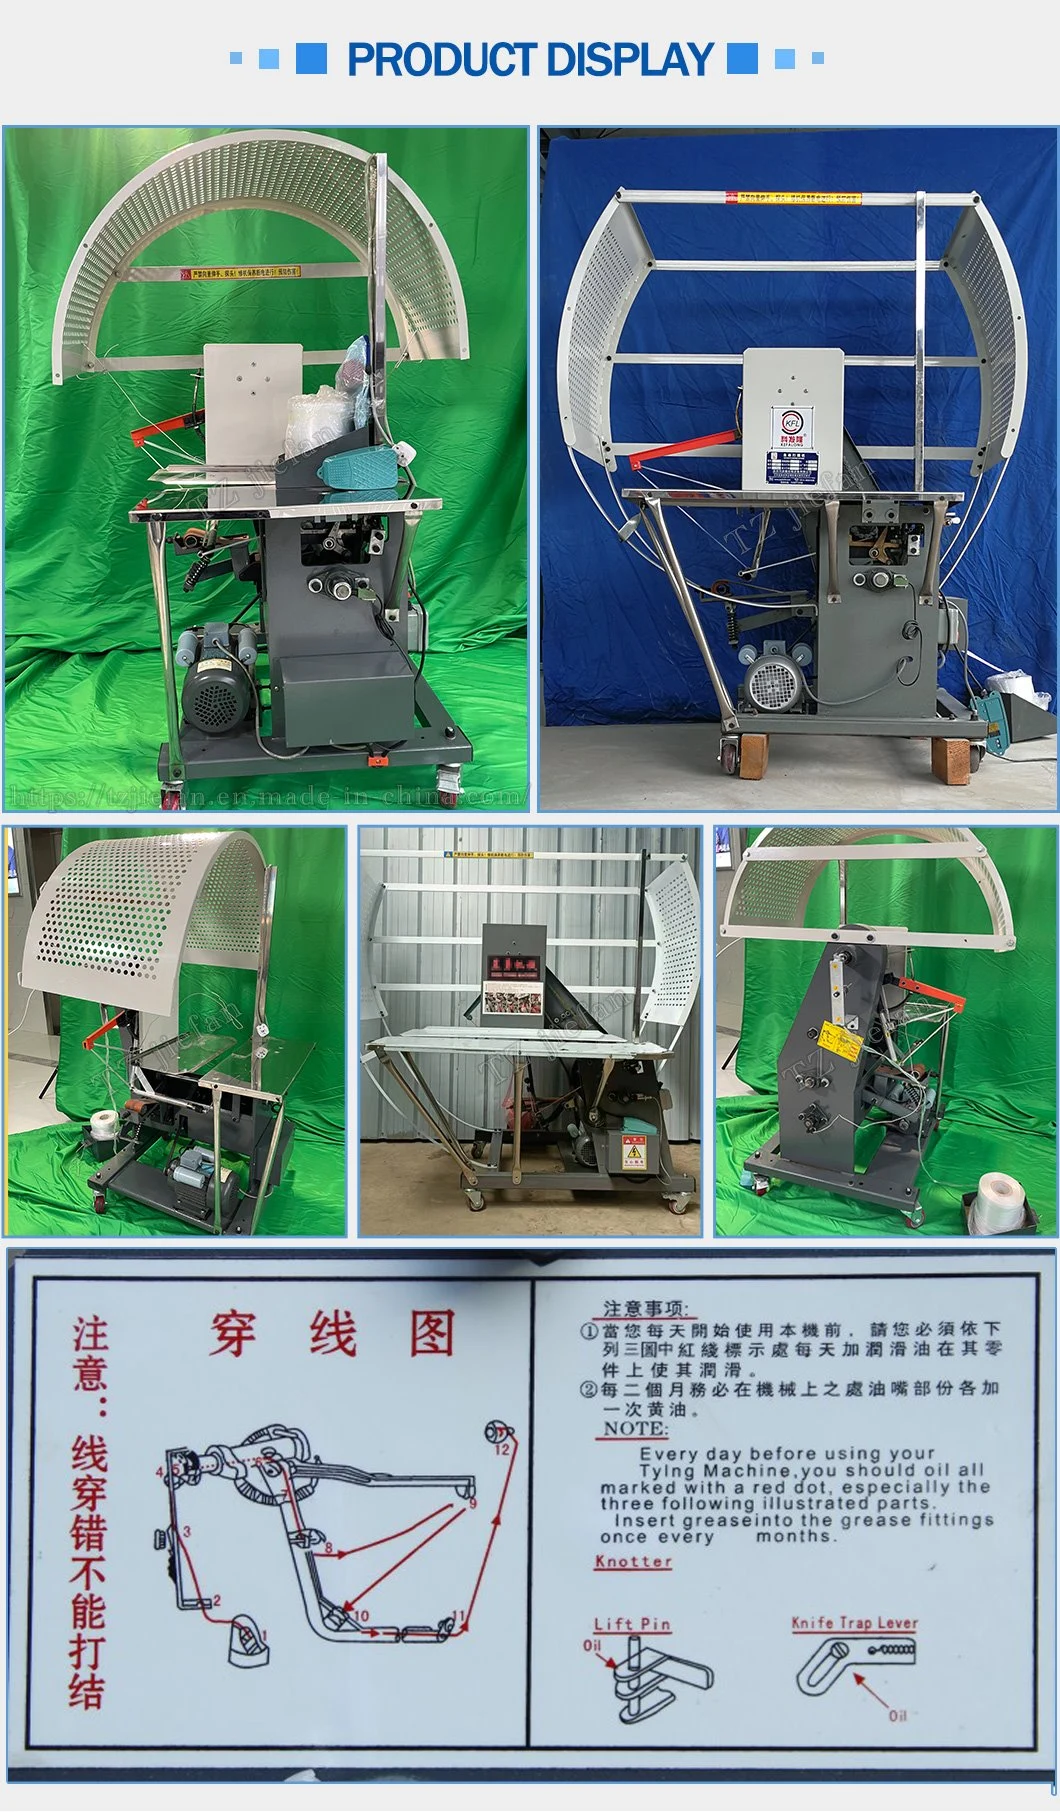 Ky-1200 Clothes, Carton, Plastic Packaging for Garment Factory Automatic Towel Baler Series